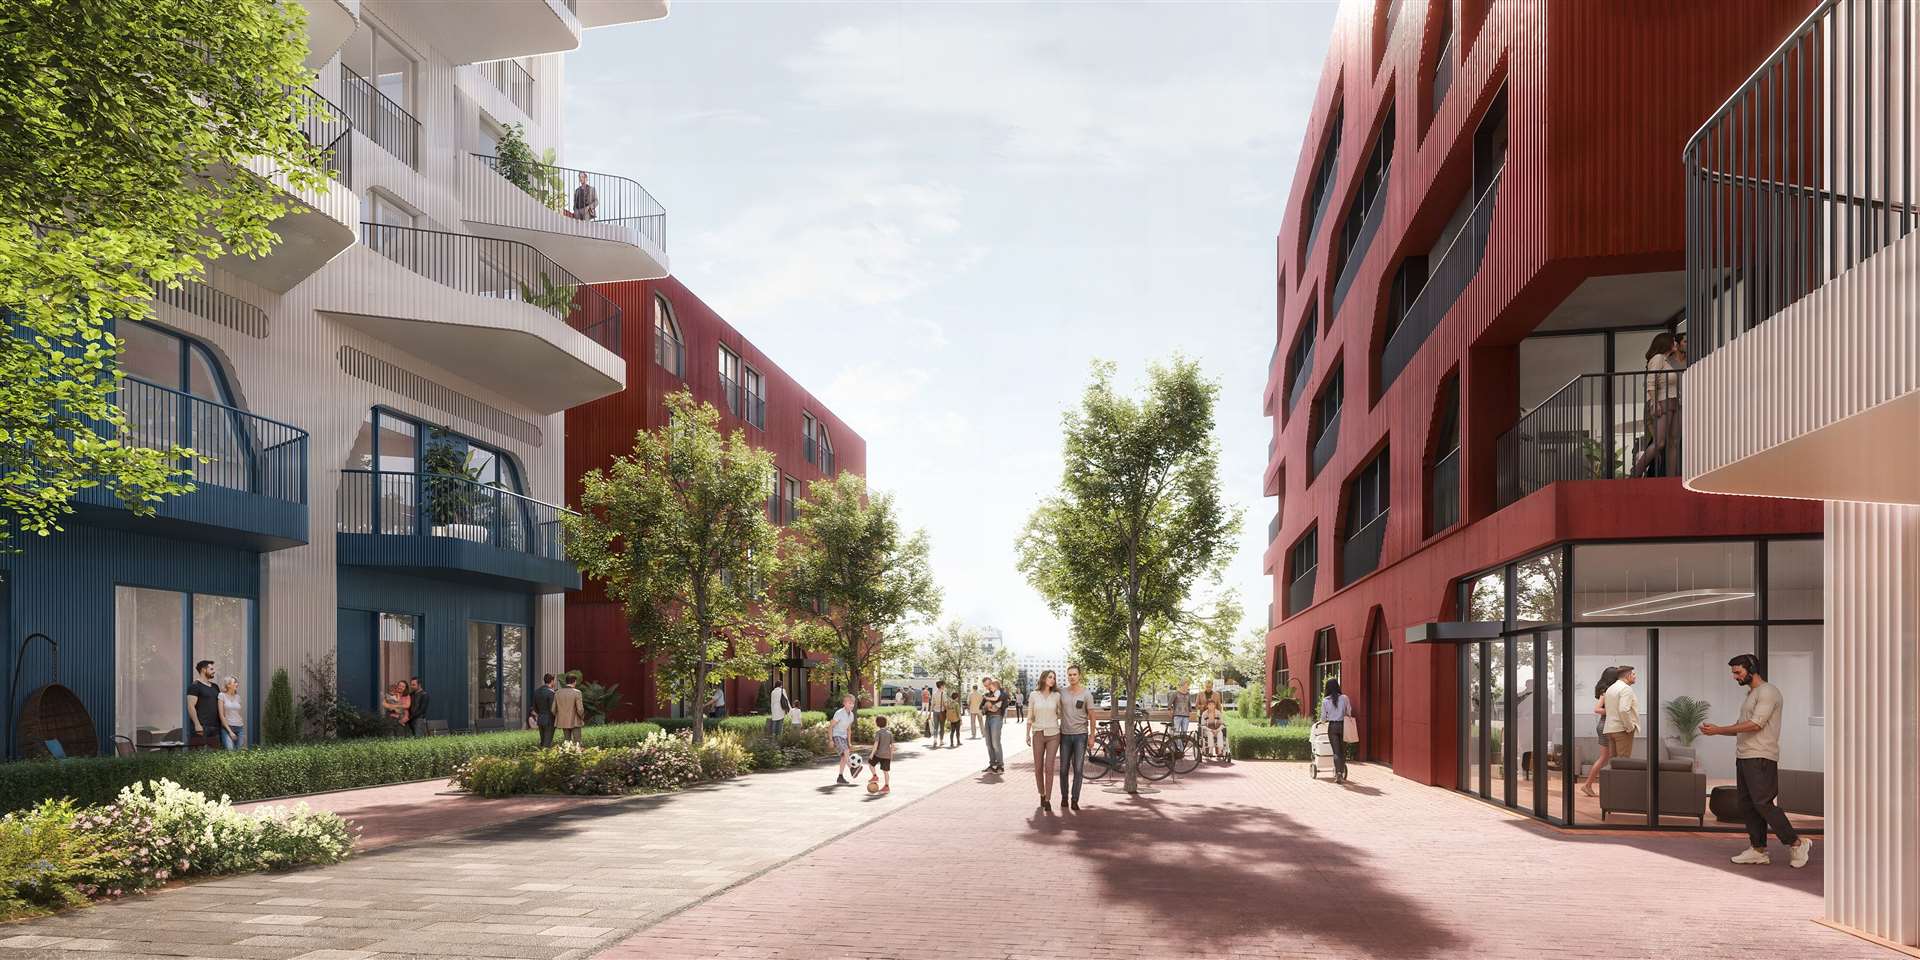 The latest designs include an "increased public realm" with wider streets and lanes. Picture: FHSDC